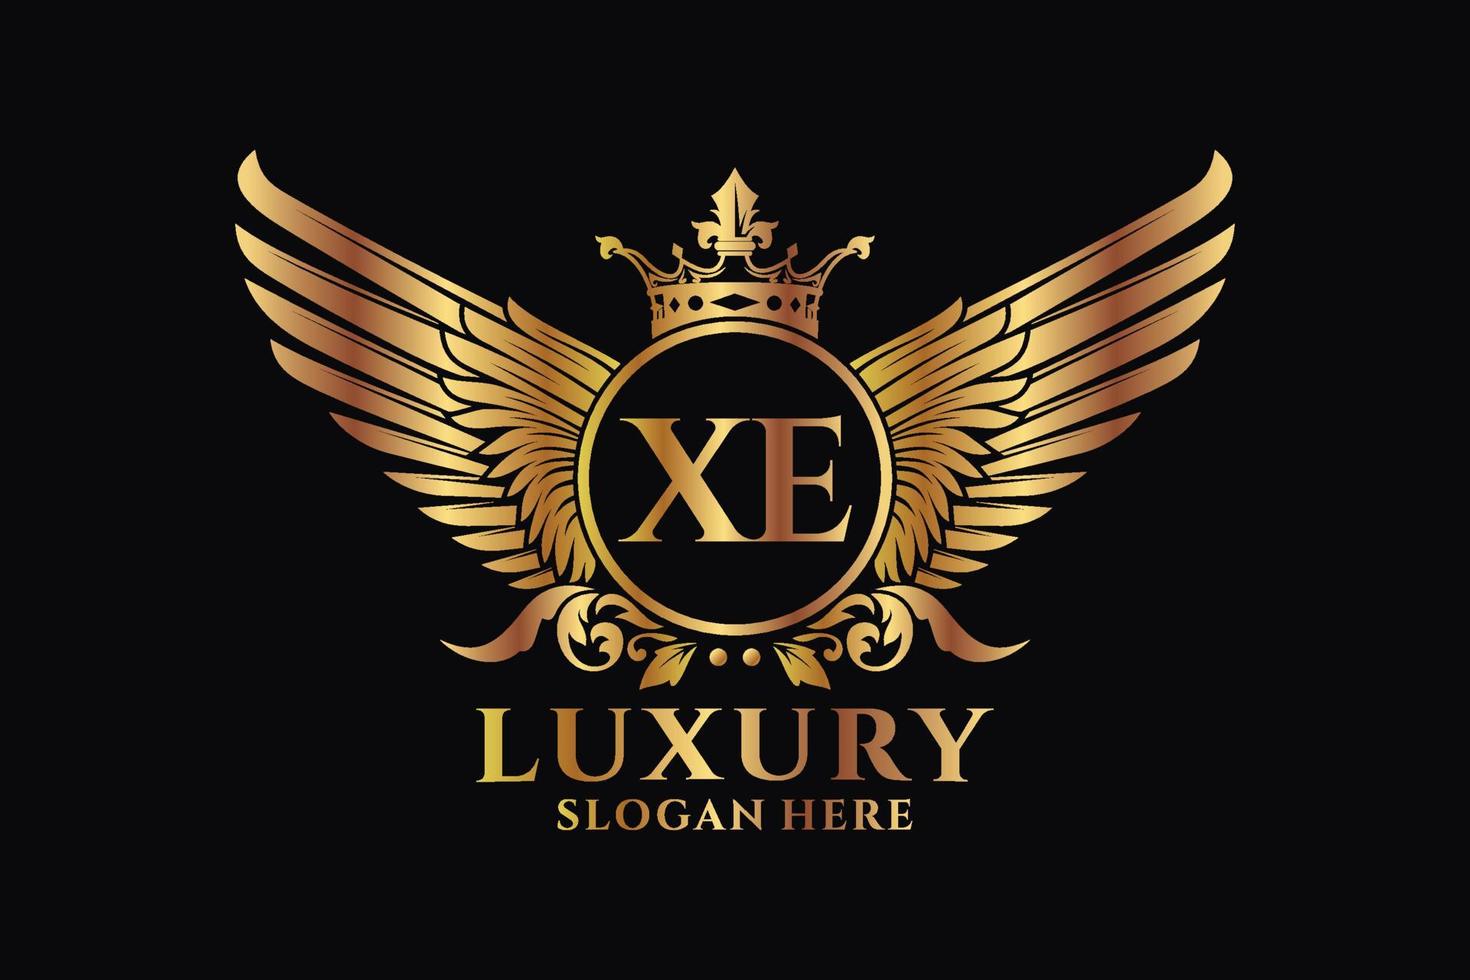 Luxury royal wing Letter XE crest Gold color Logo vector, Victory logo, crest logo, wing logo, vector logo template.